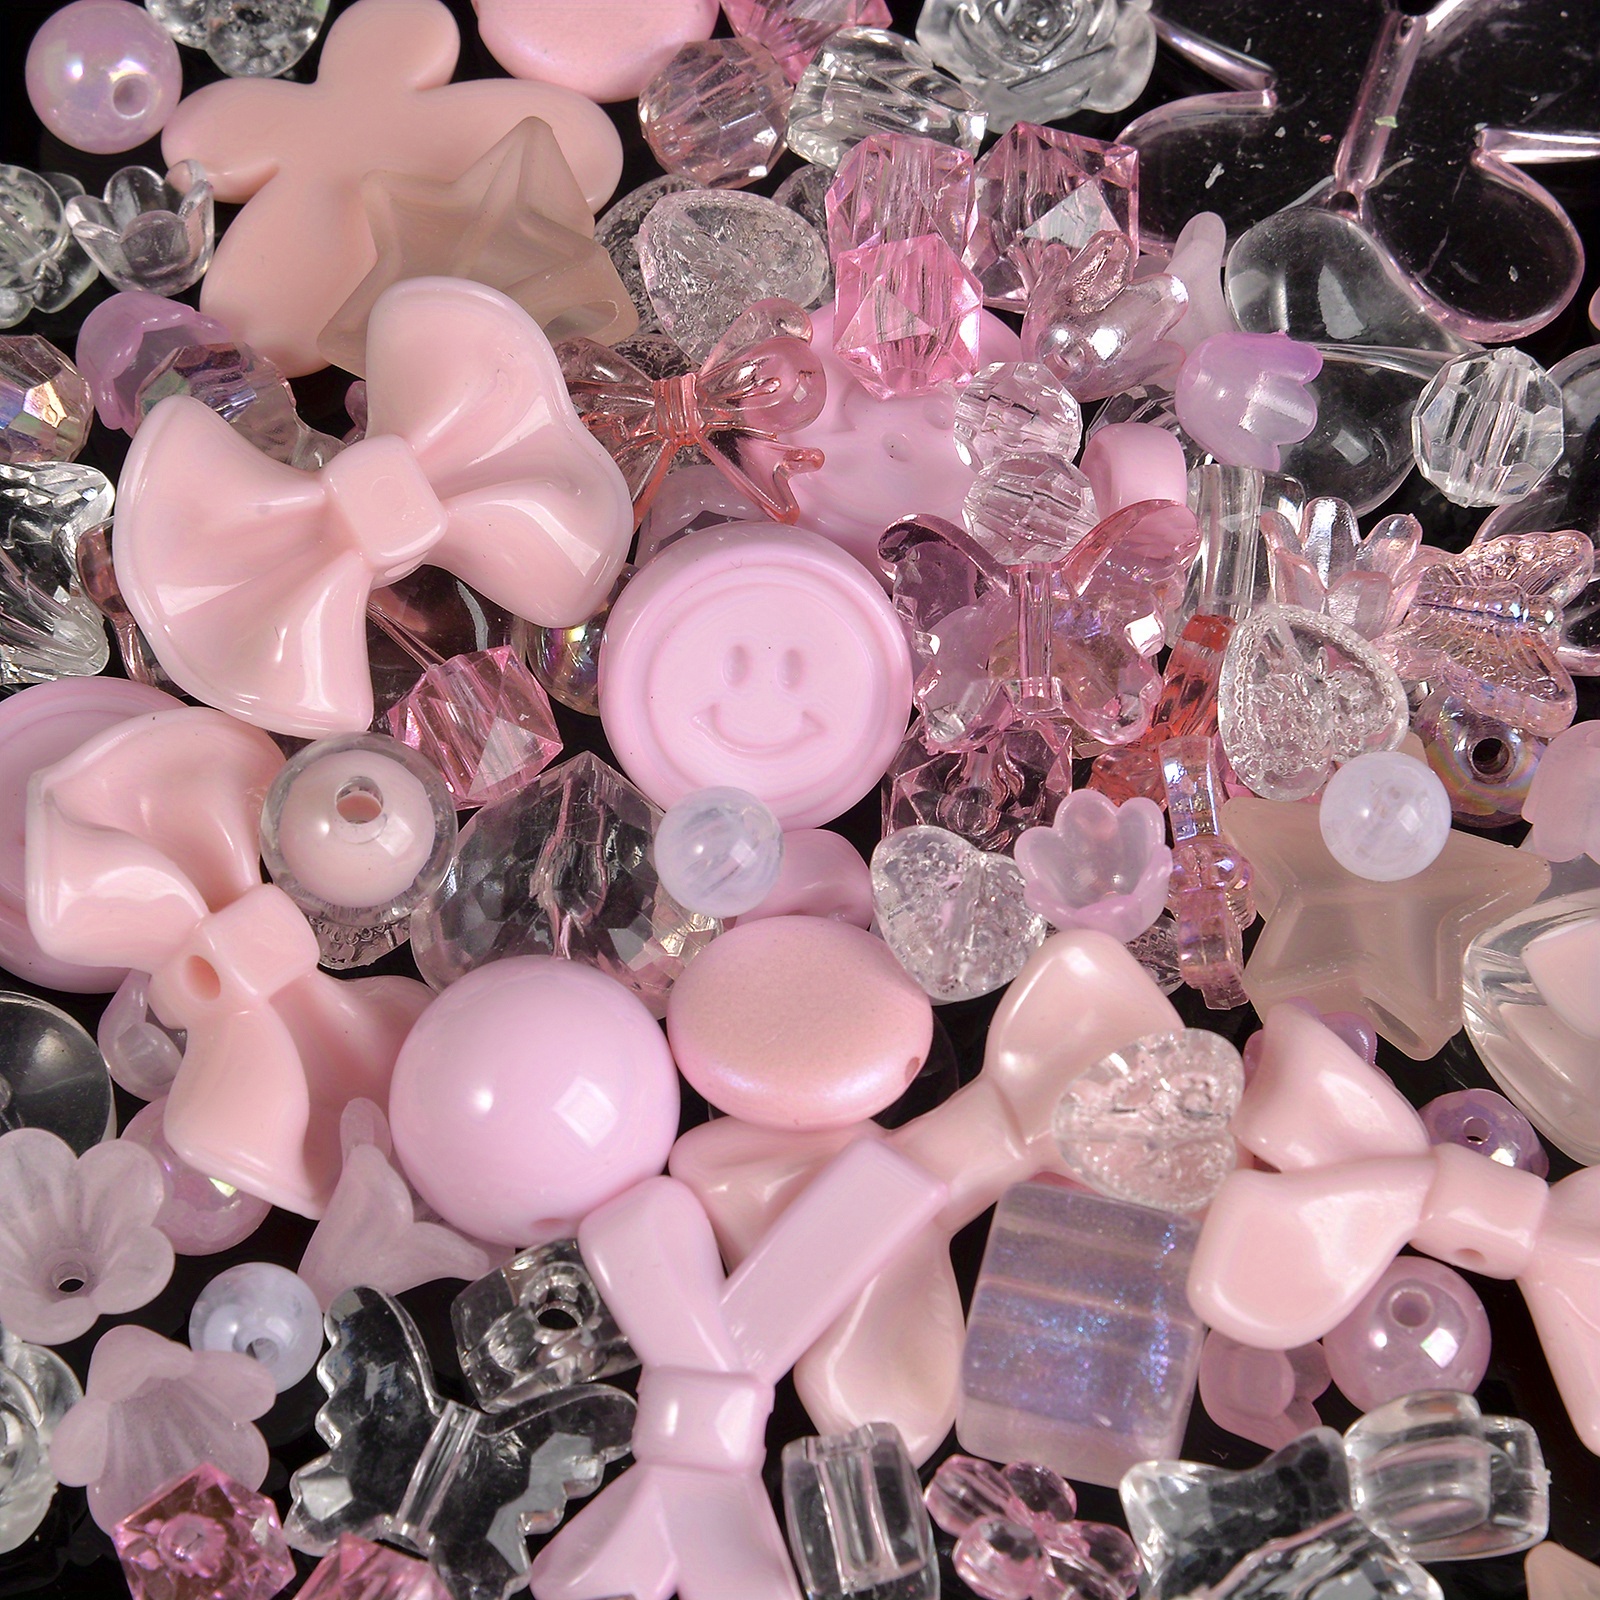 100pcs Heart Crystal Beads Bulk Heart Spacer Beads Crystal Glass Beads  Loose Beads for Earring Bracelet Necklace Key Chains Jewelry DIY Craft  Making